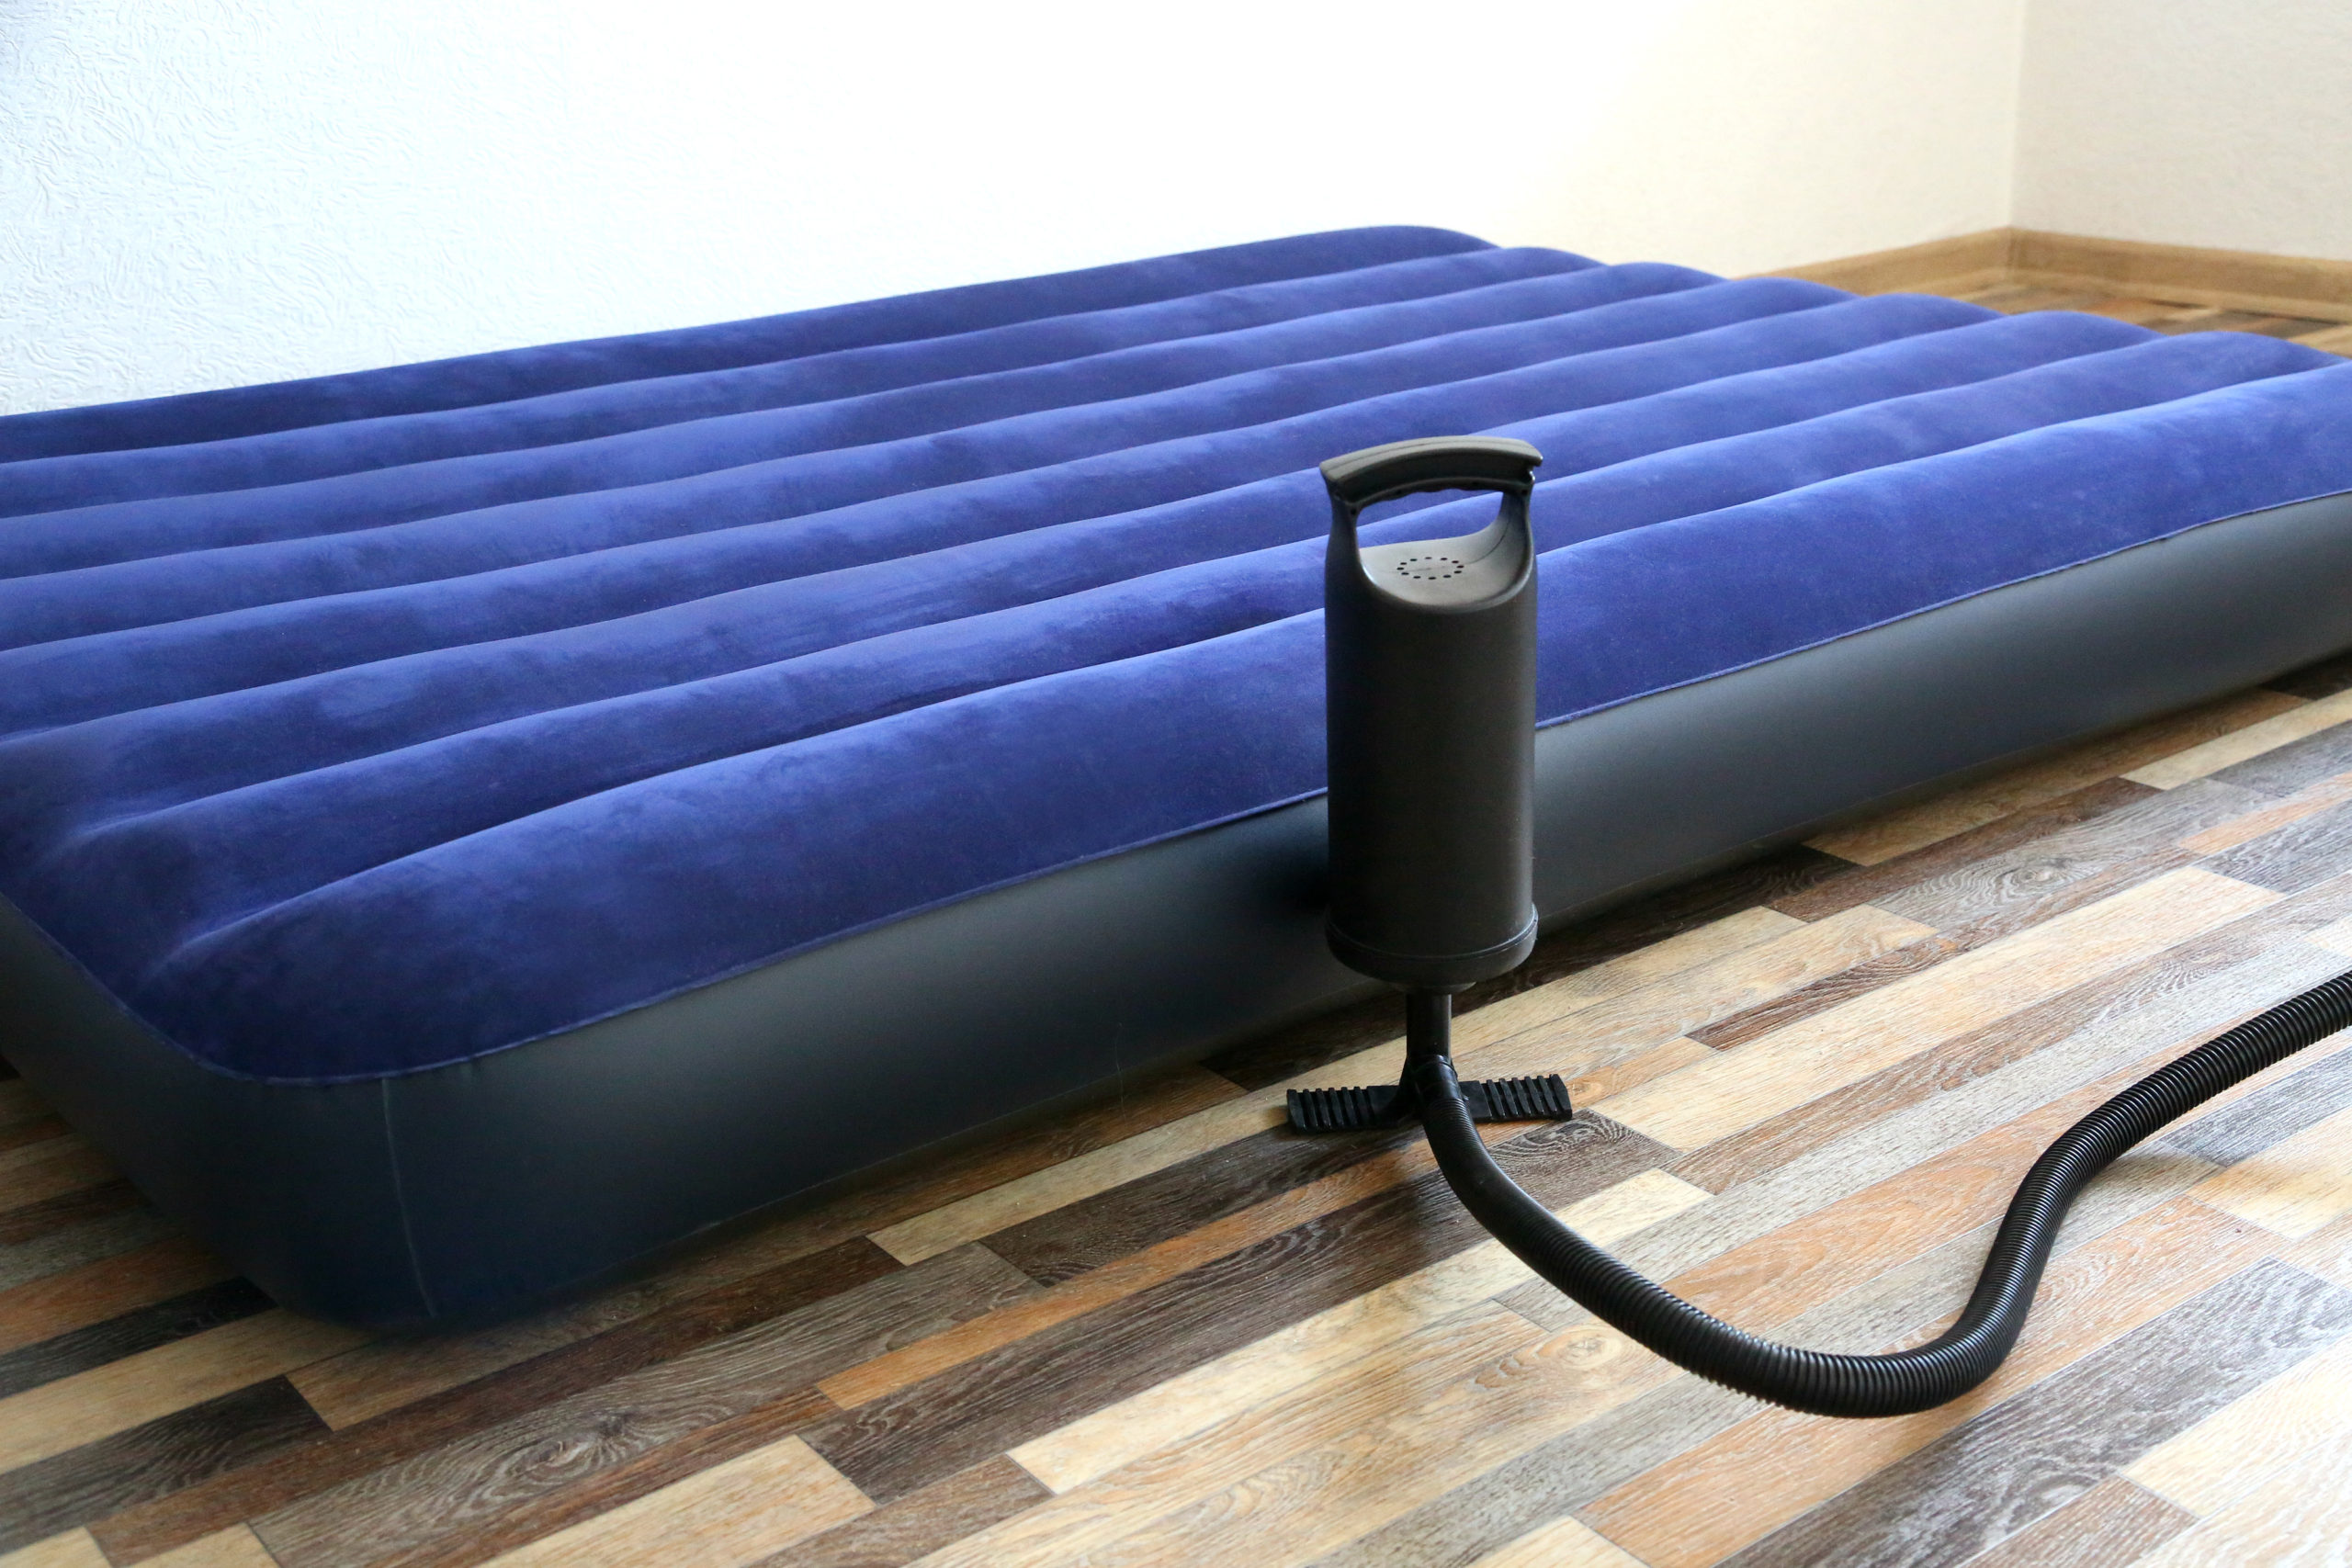 How to Find a Hole in an Air Mattress